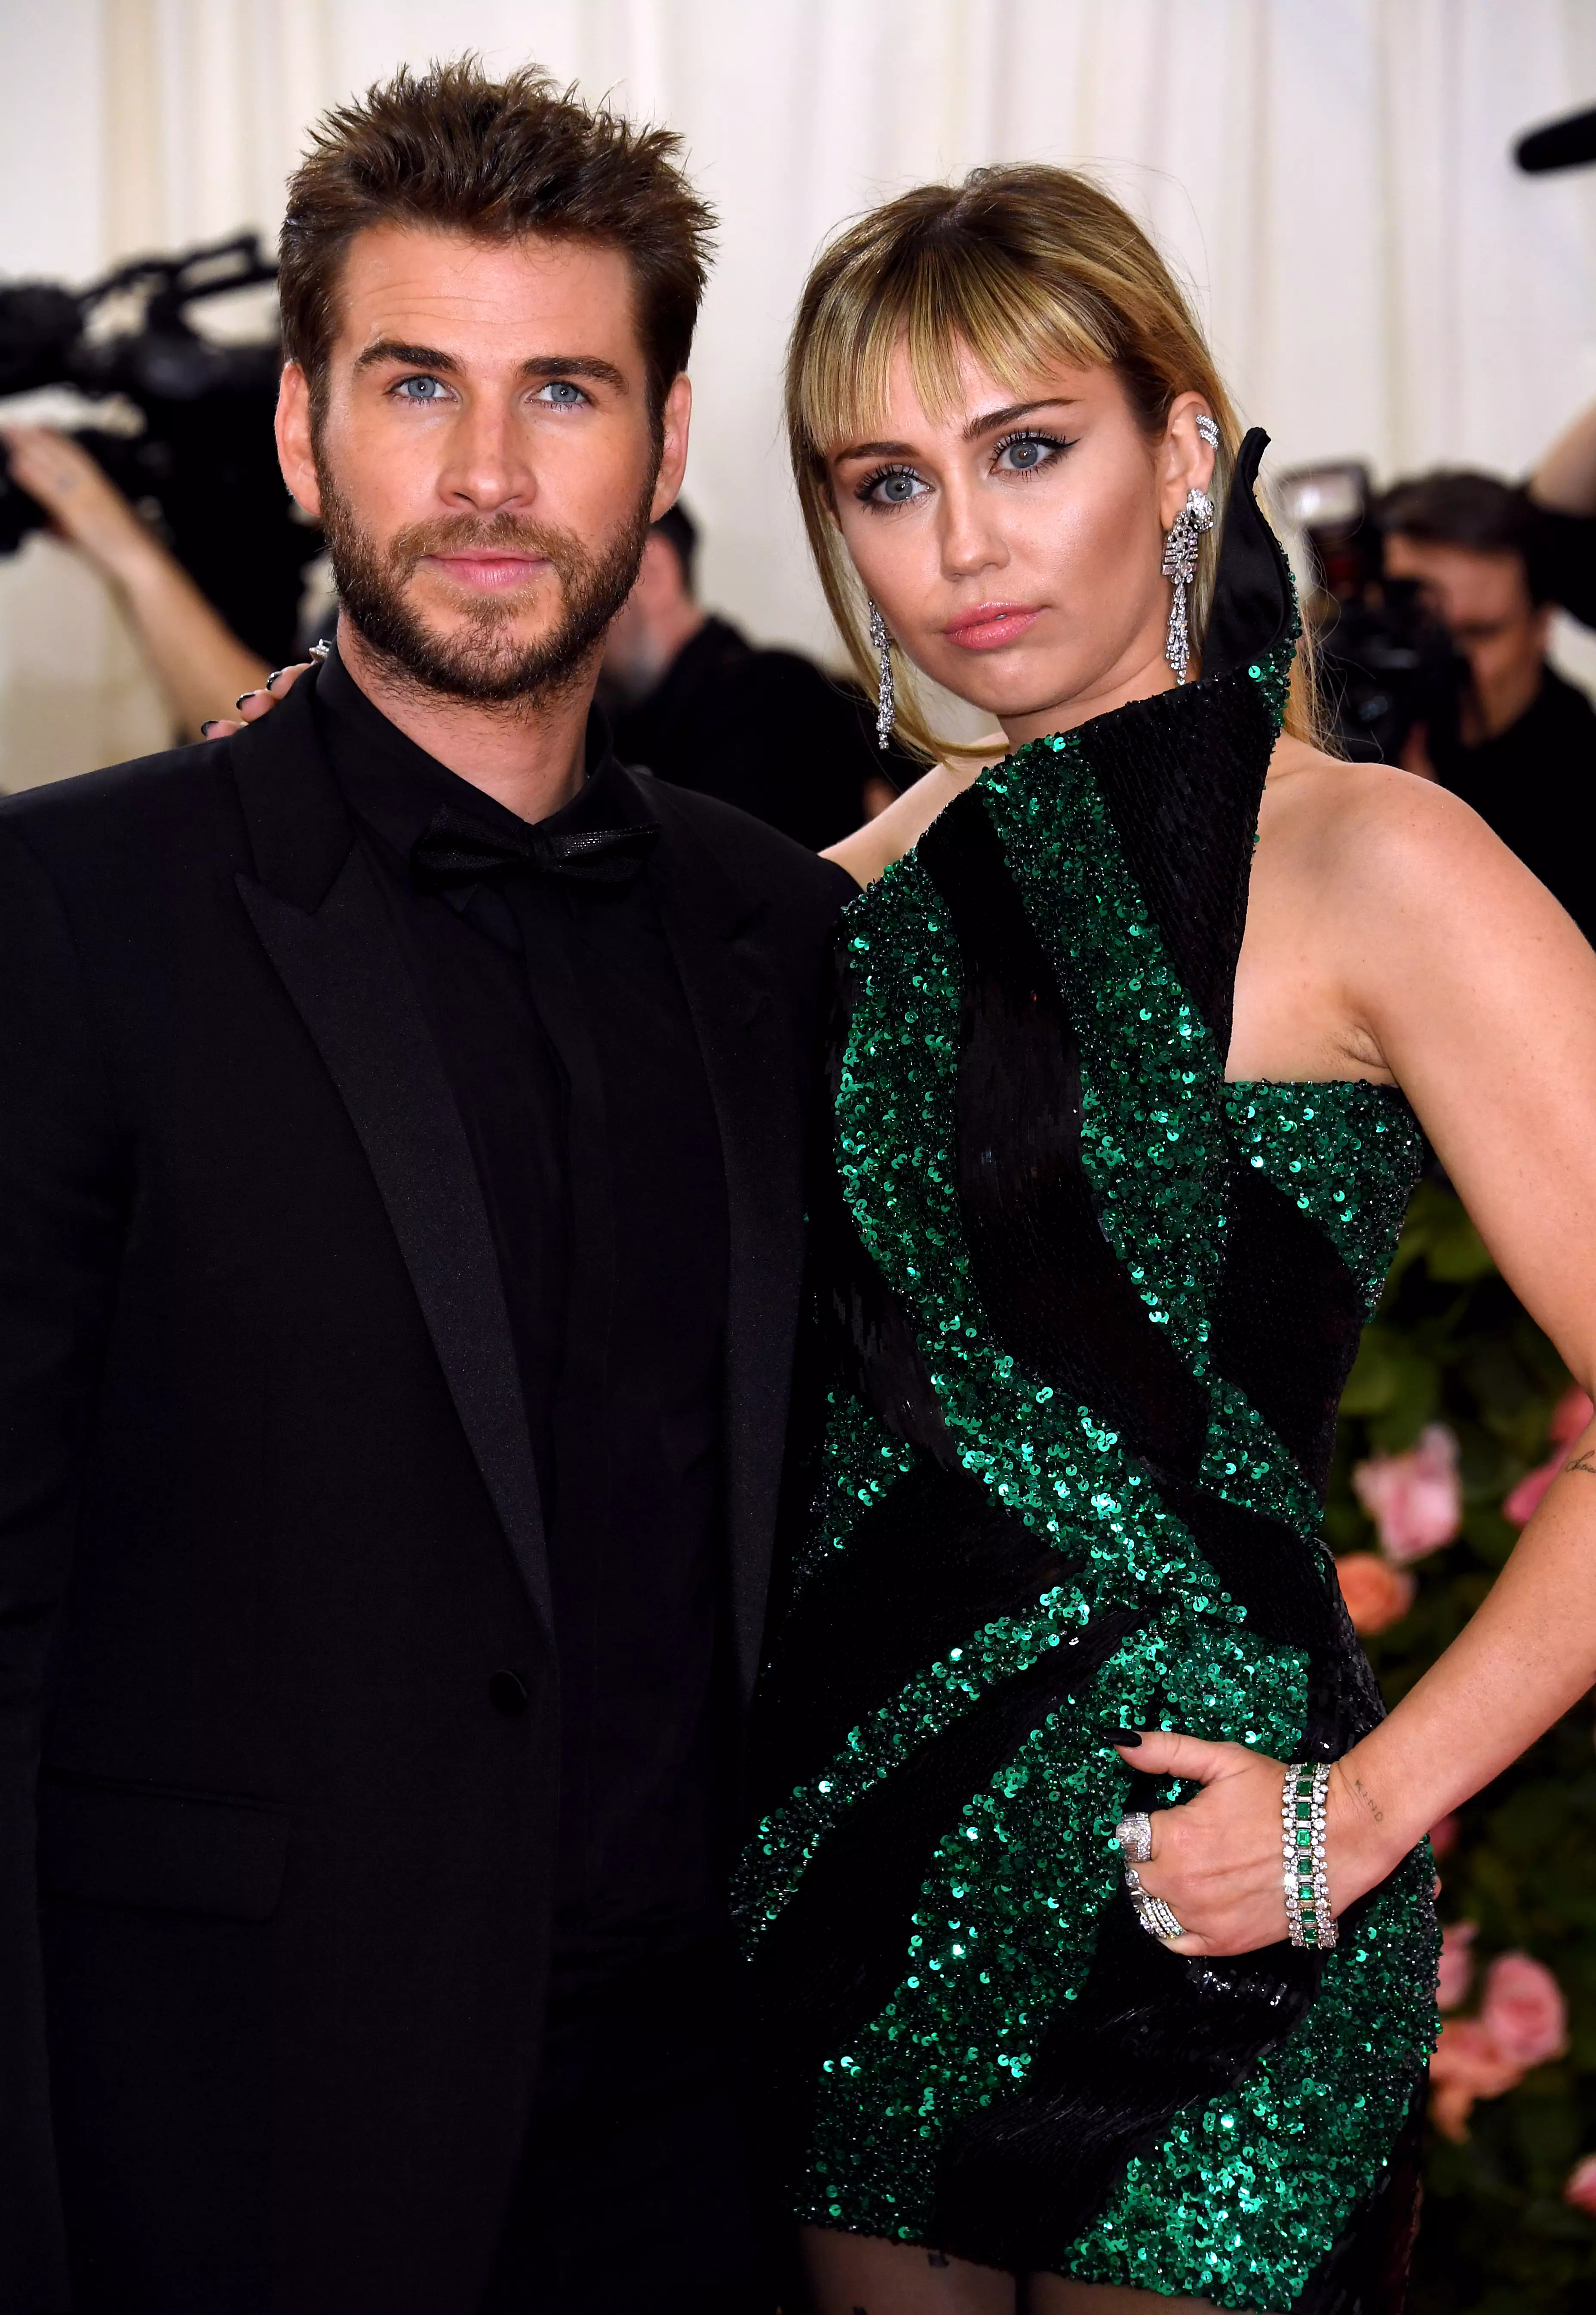 Miley previously dated Liam Hemsworth (